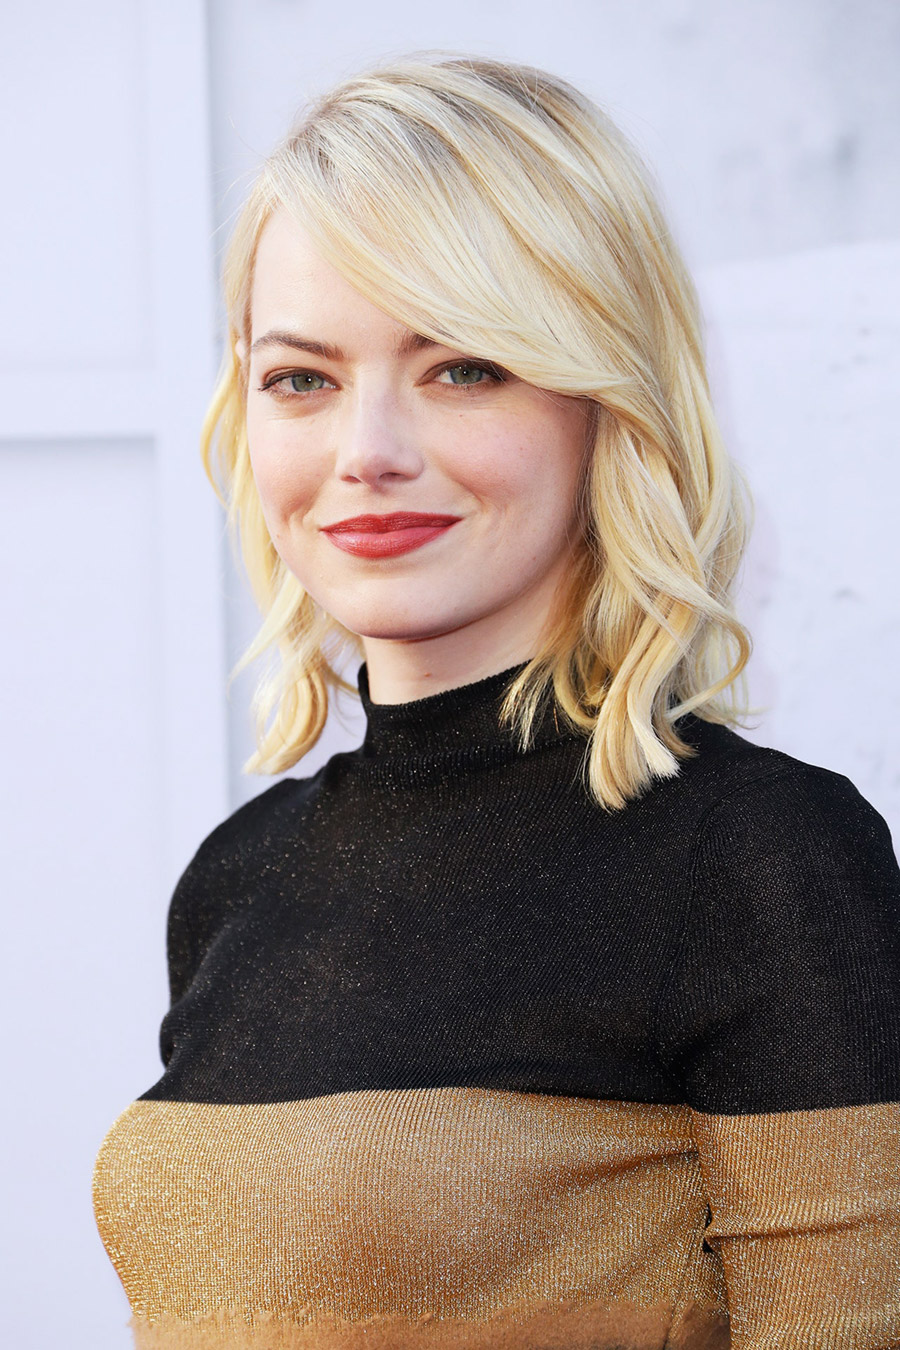 Emma-stone-the-best-famous-picture-actress-Wedding-VogueGlobe-Getty-Images